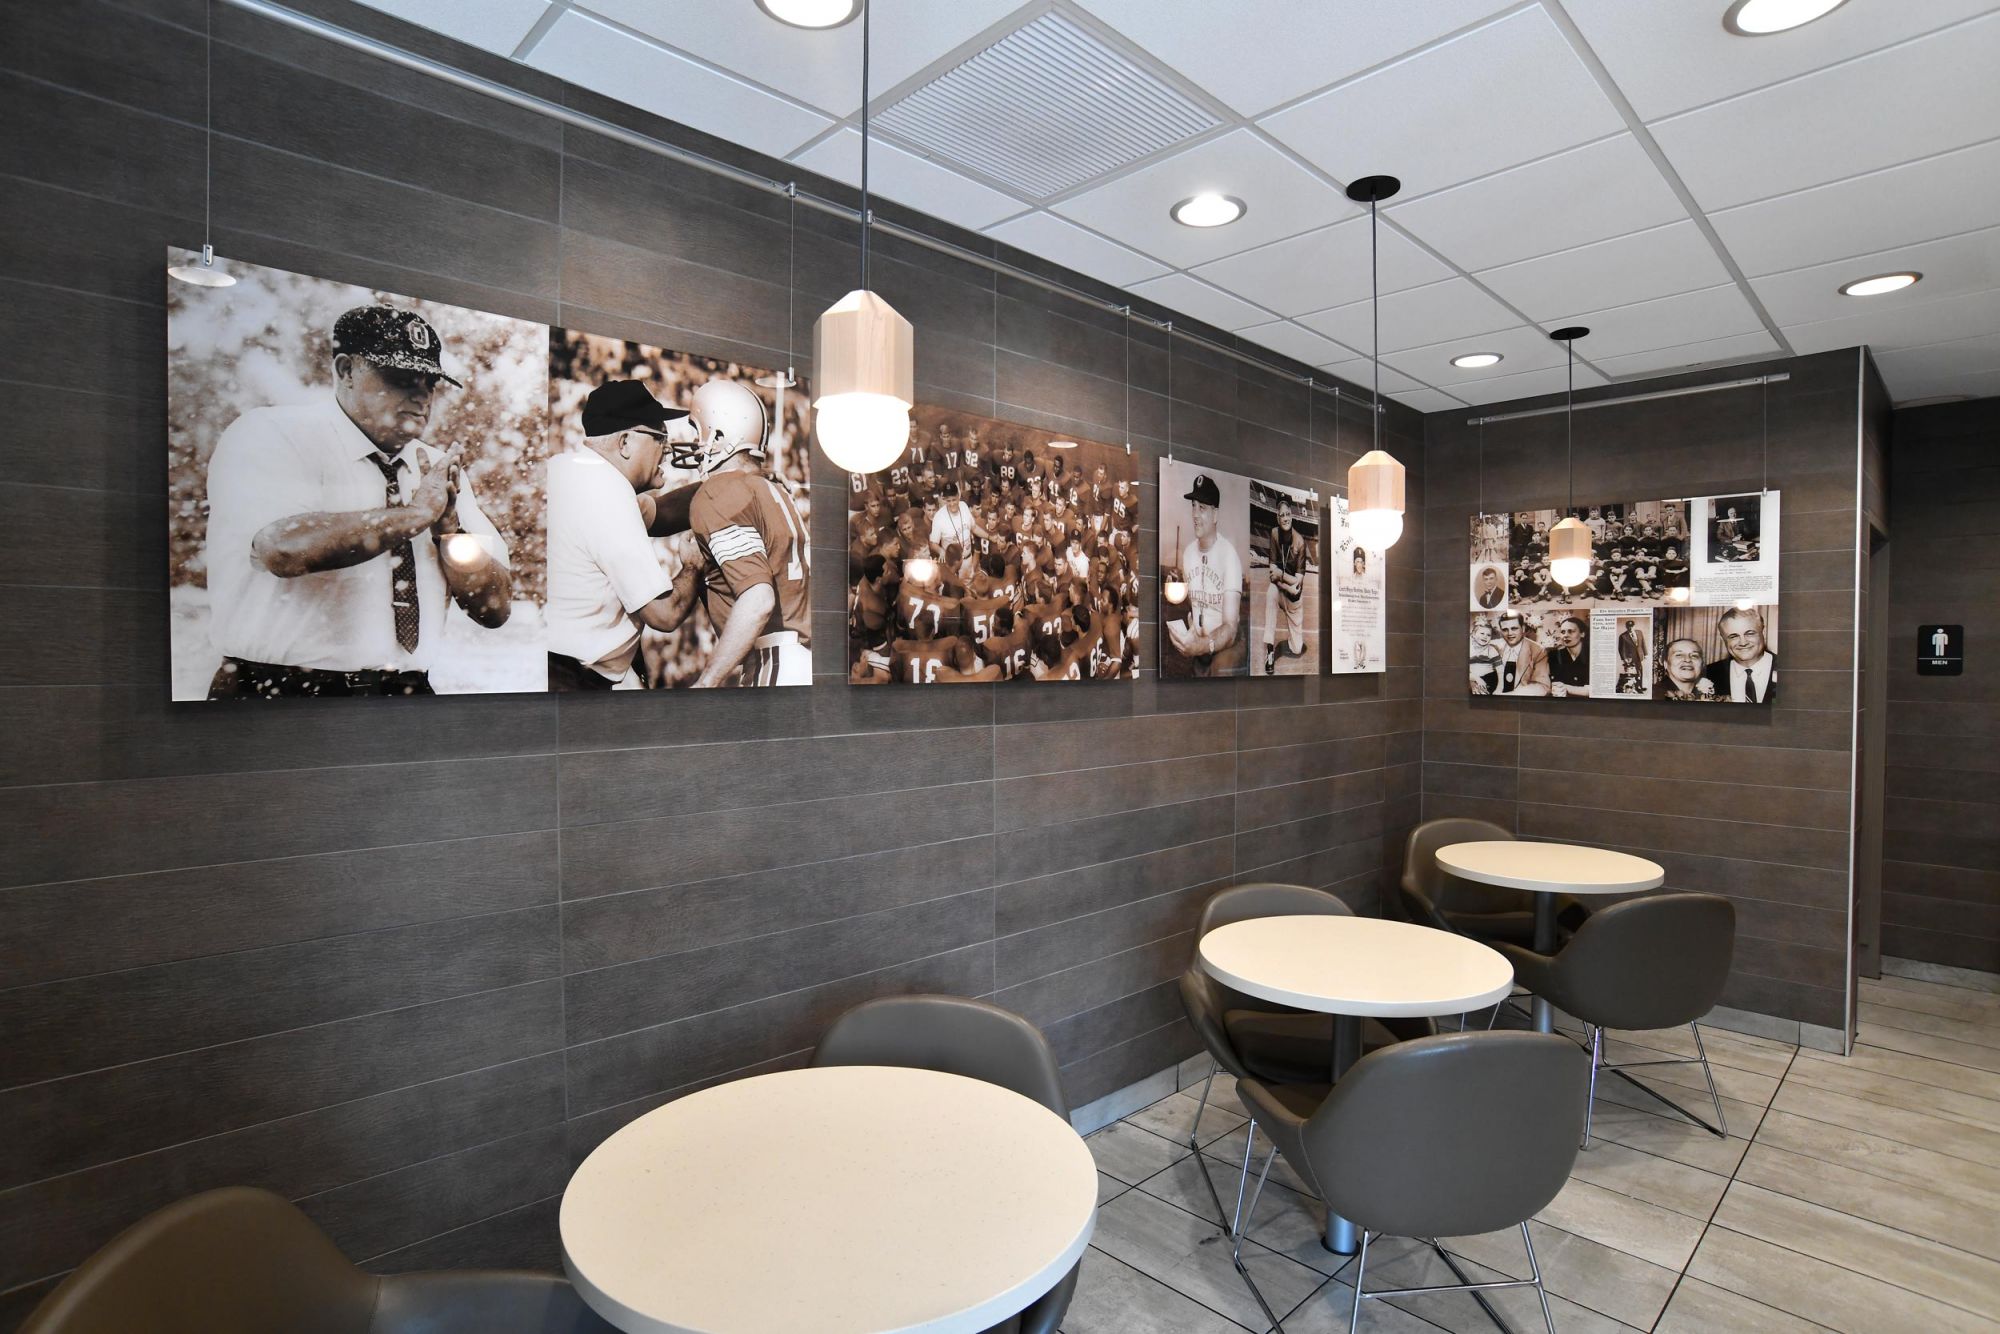 Newcomerstown McDonalds Restaurant Woody Hayes / Cy Young Exhibit